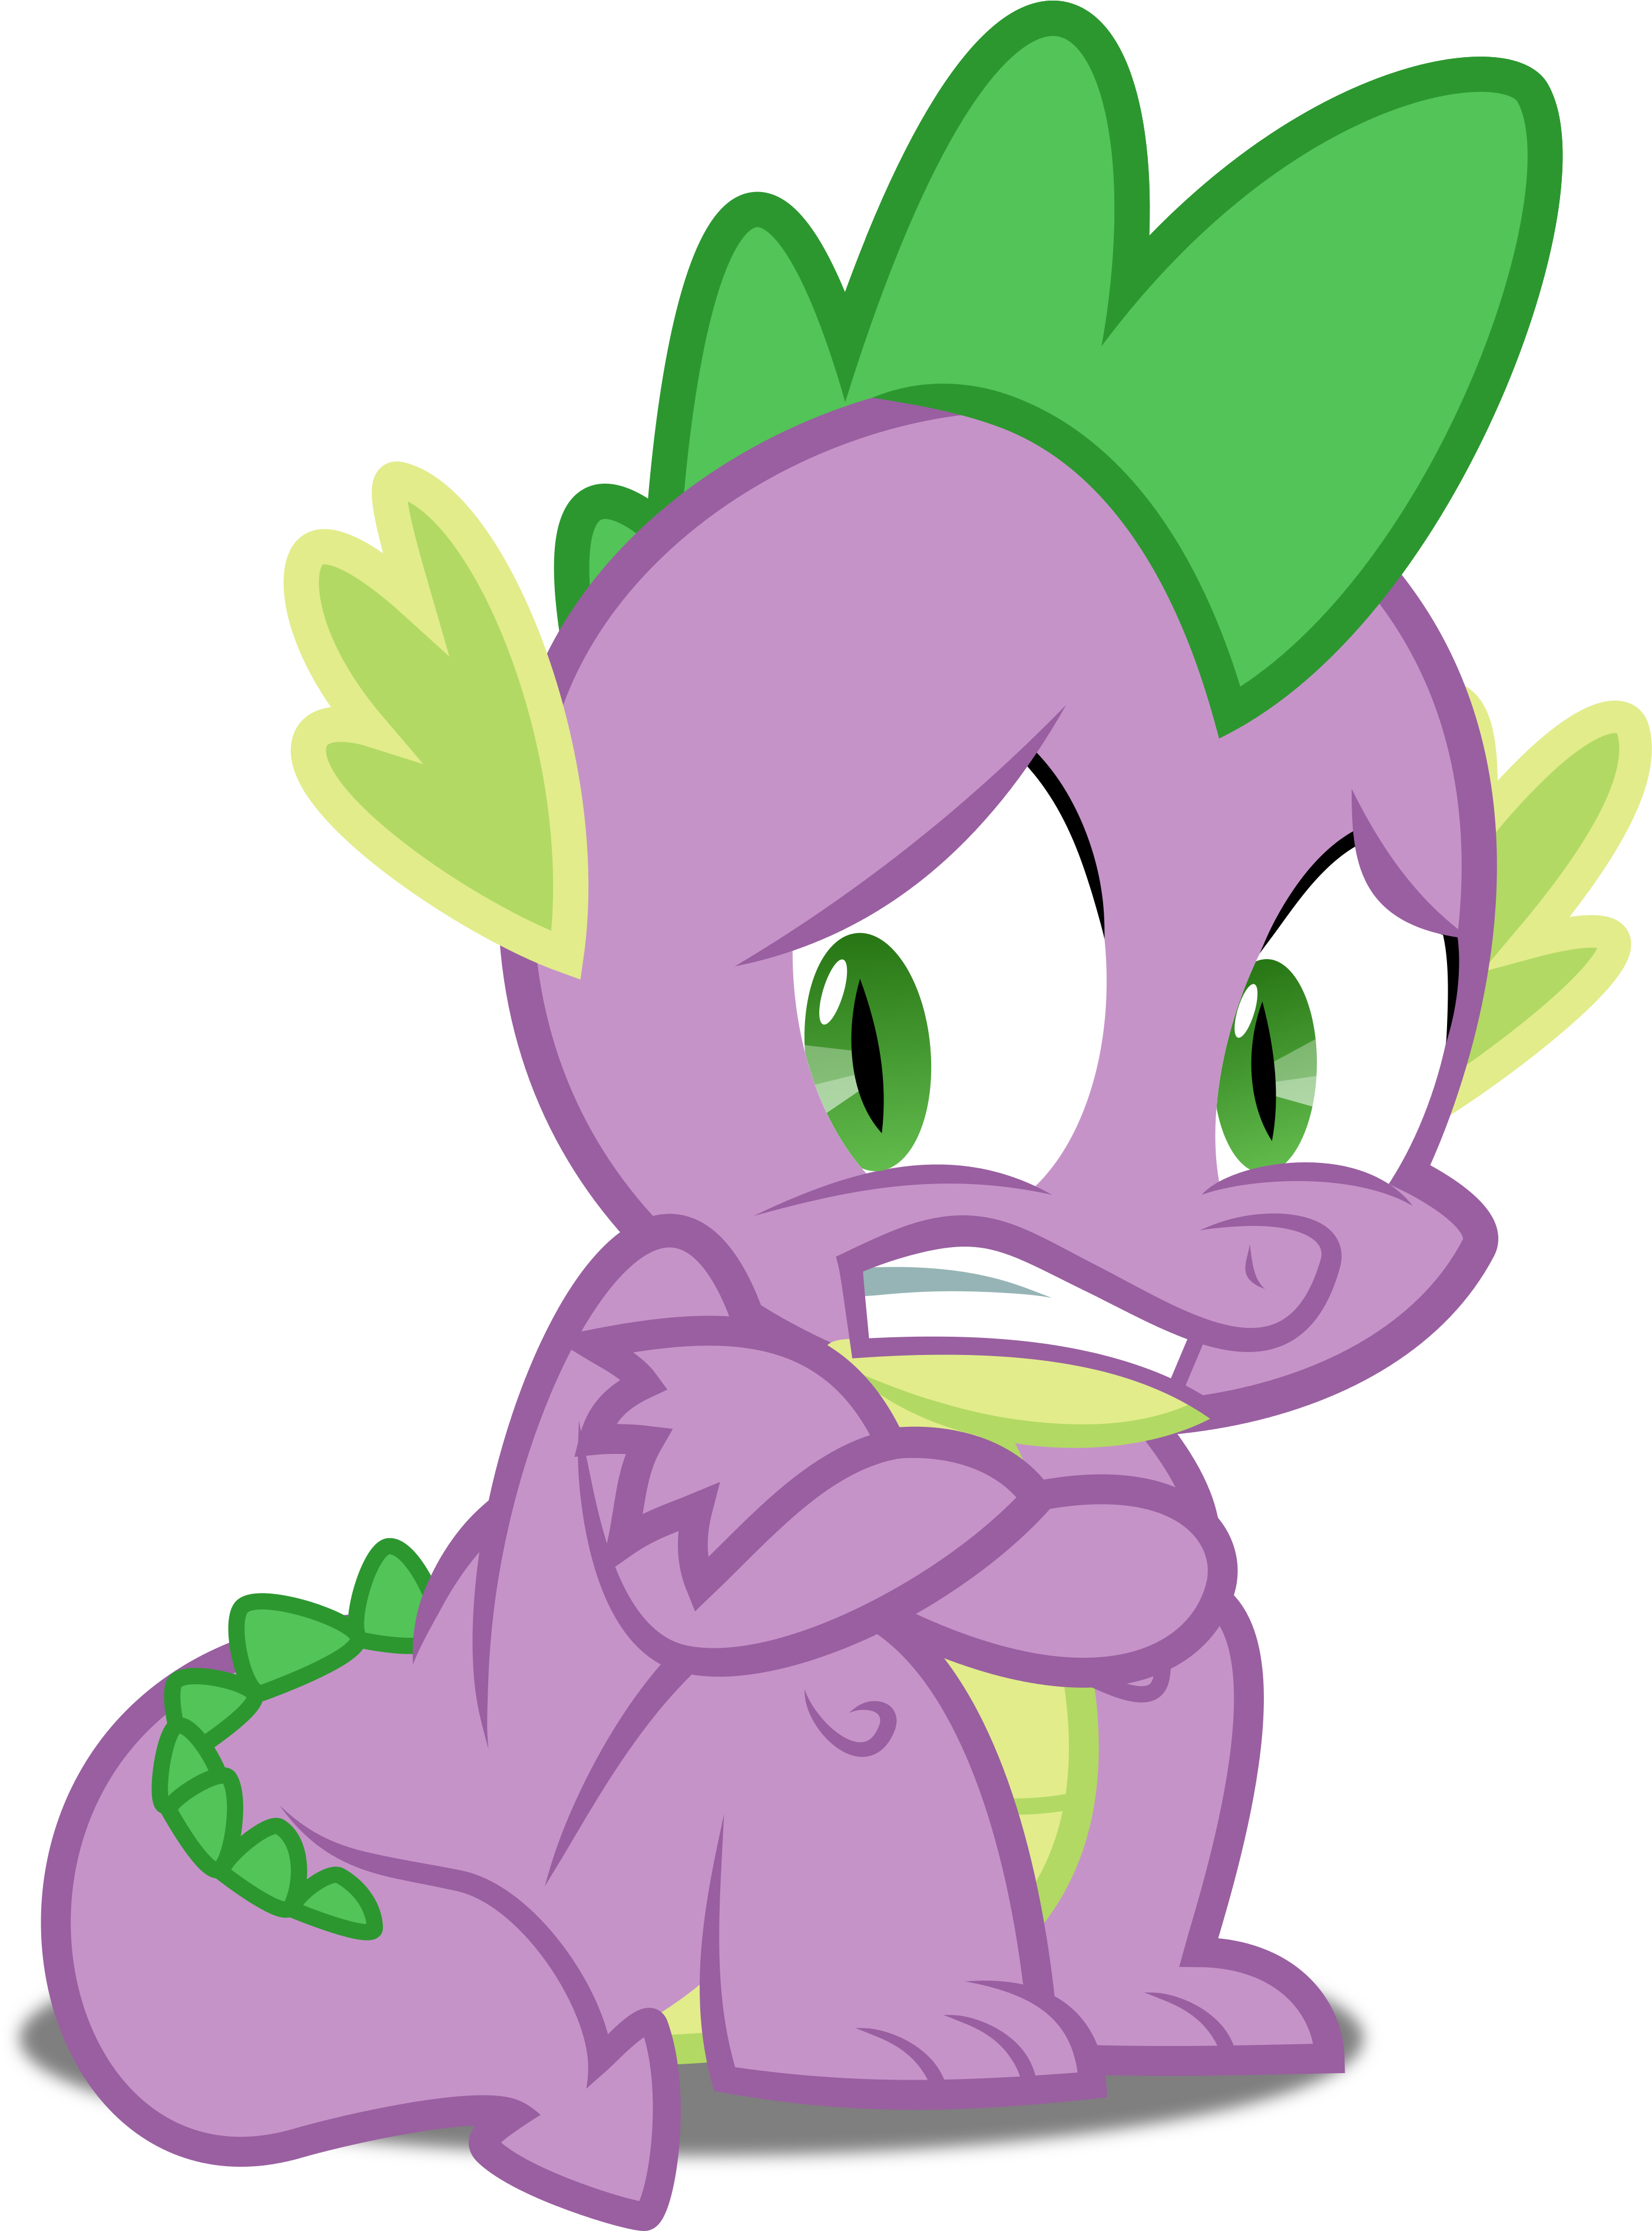 Little Pony png images